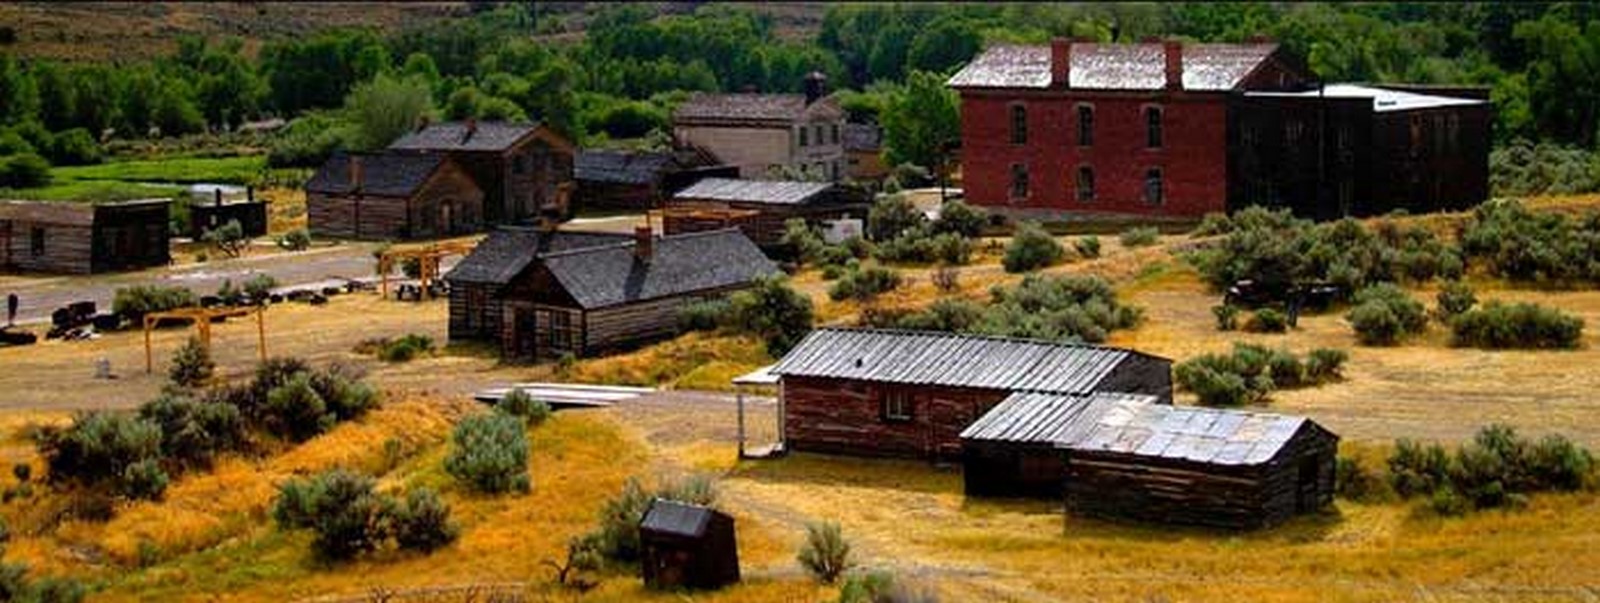 Lost In Time: Bannack, Montana - Sheet1